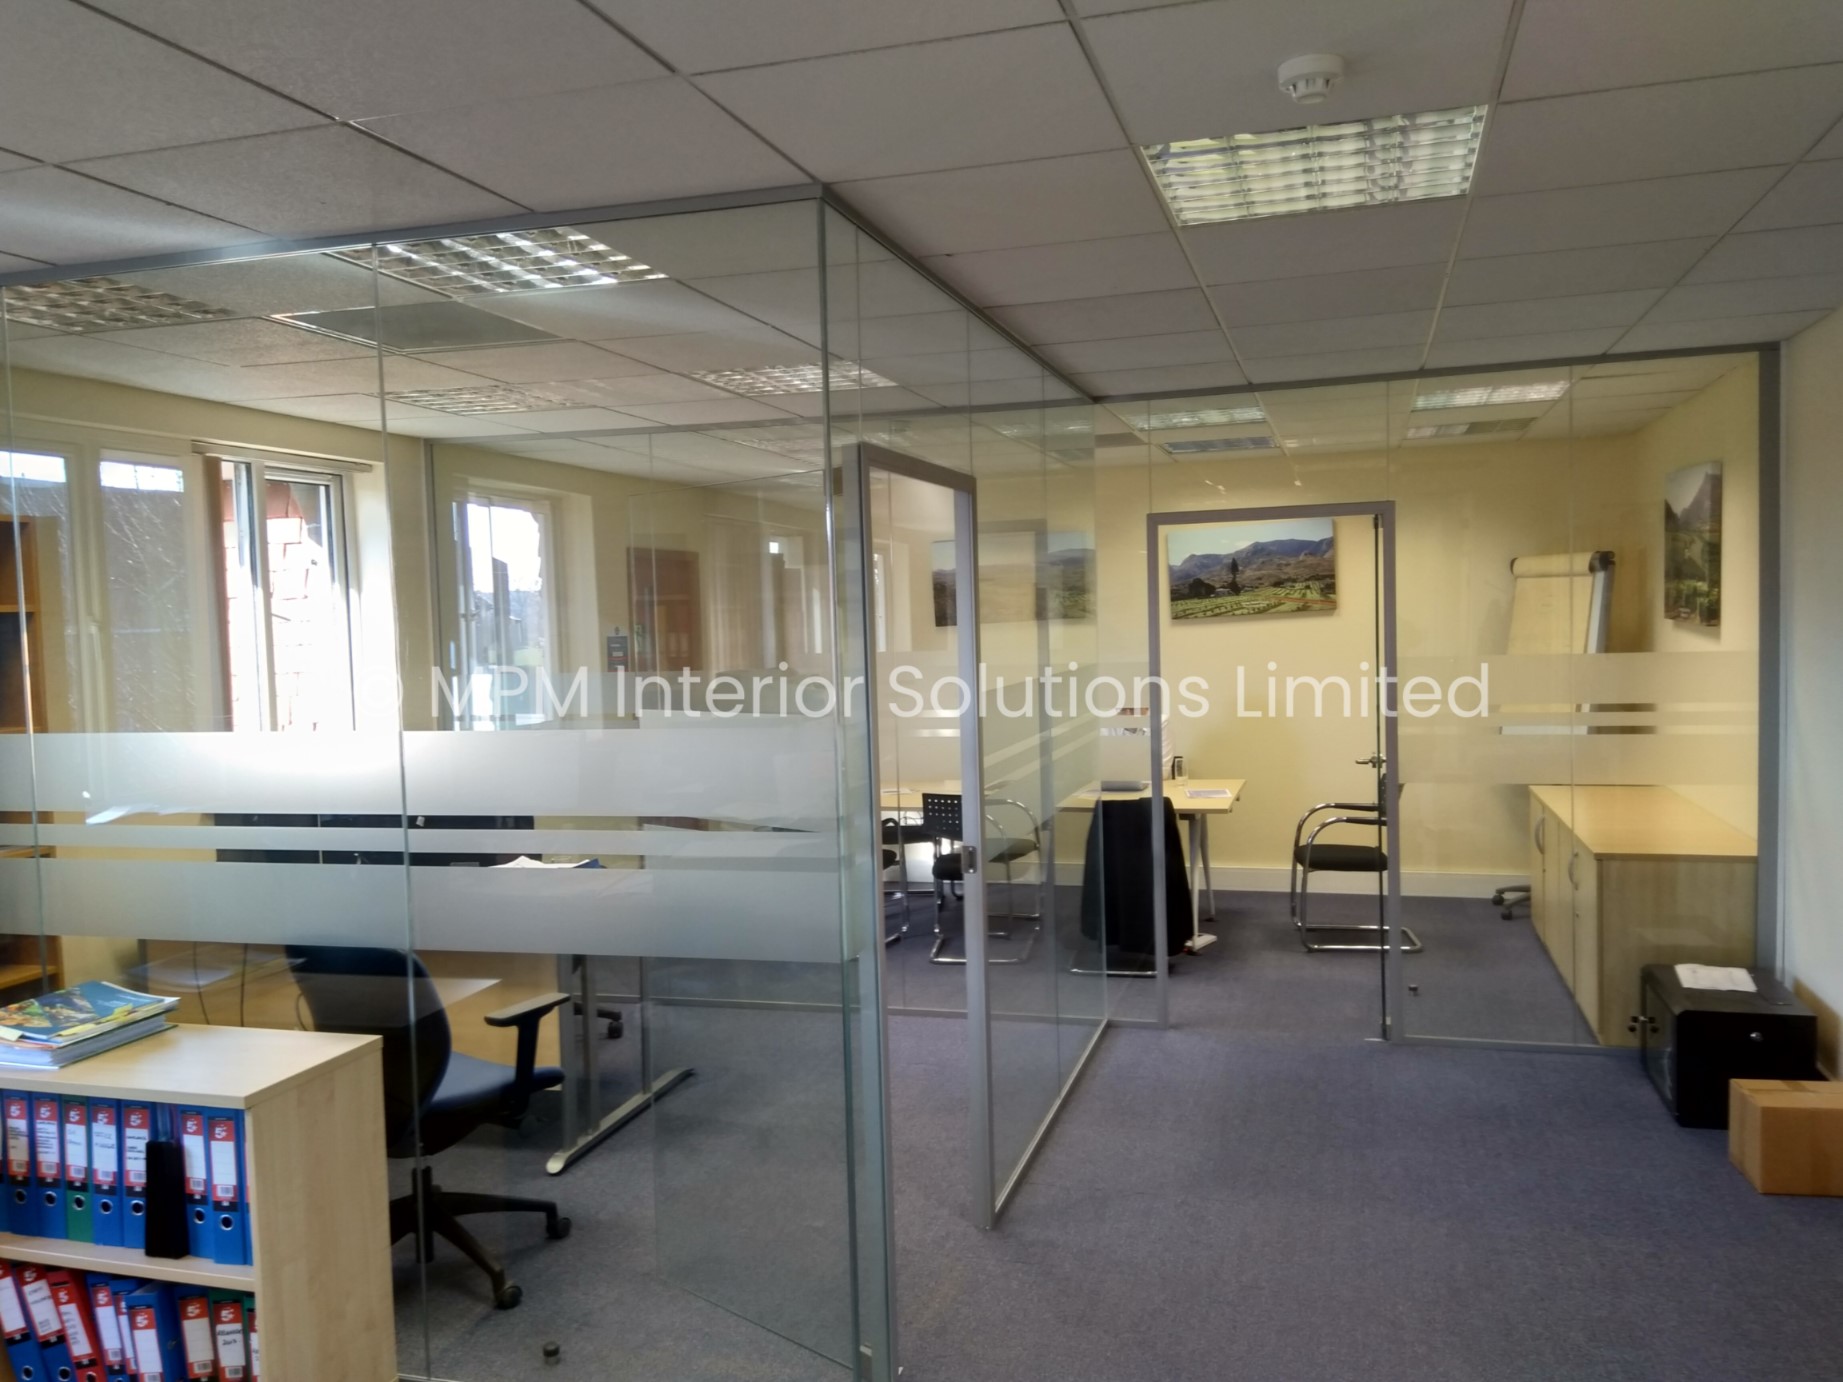 Frameless Glass Office Partitioning, Office Refurbishment/Fit-Out, Silverstreet Capital LLP (Cobham, Surrey), MPM Interior Solutions Limited